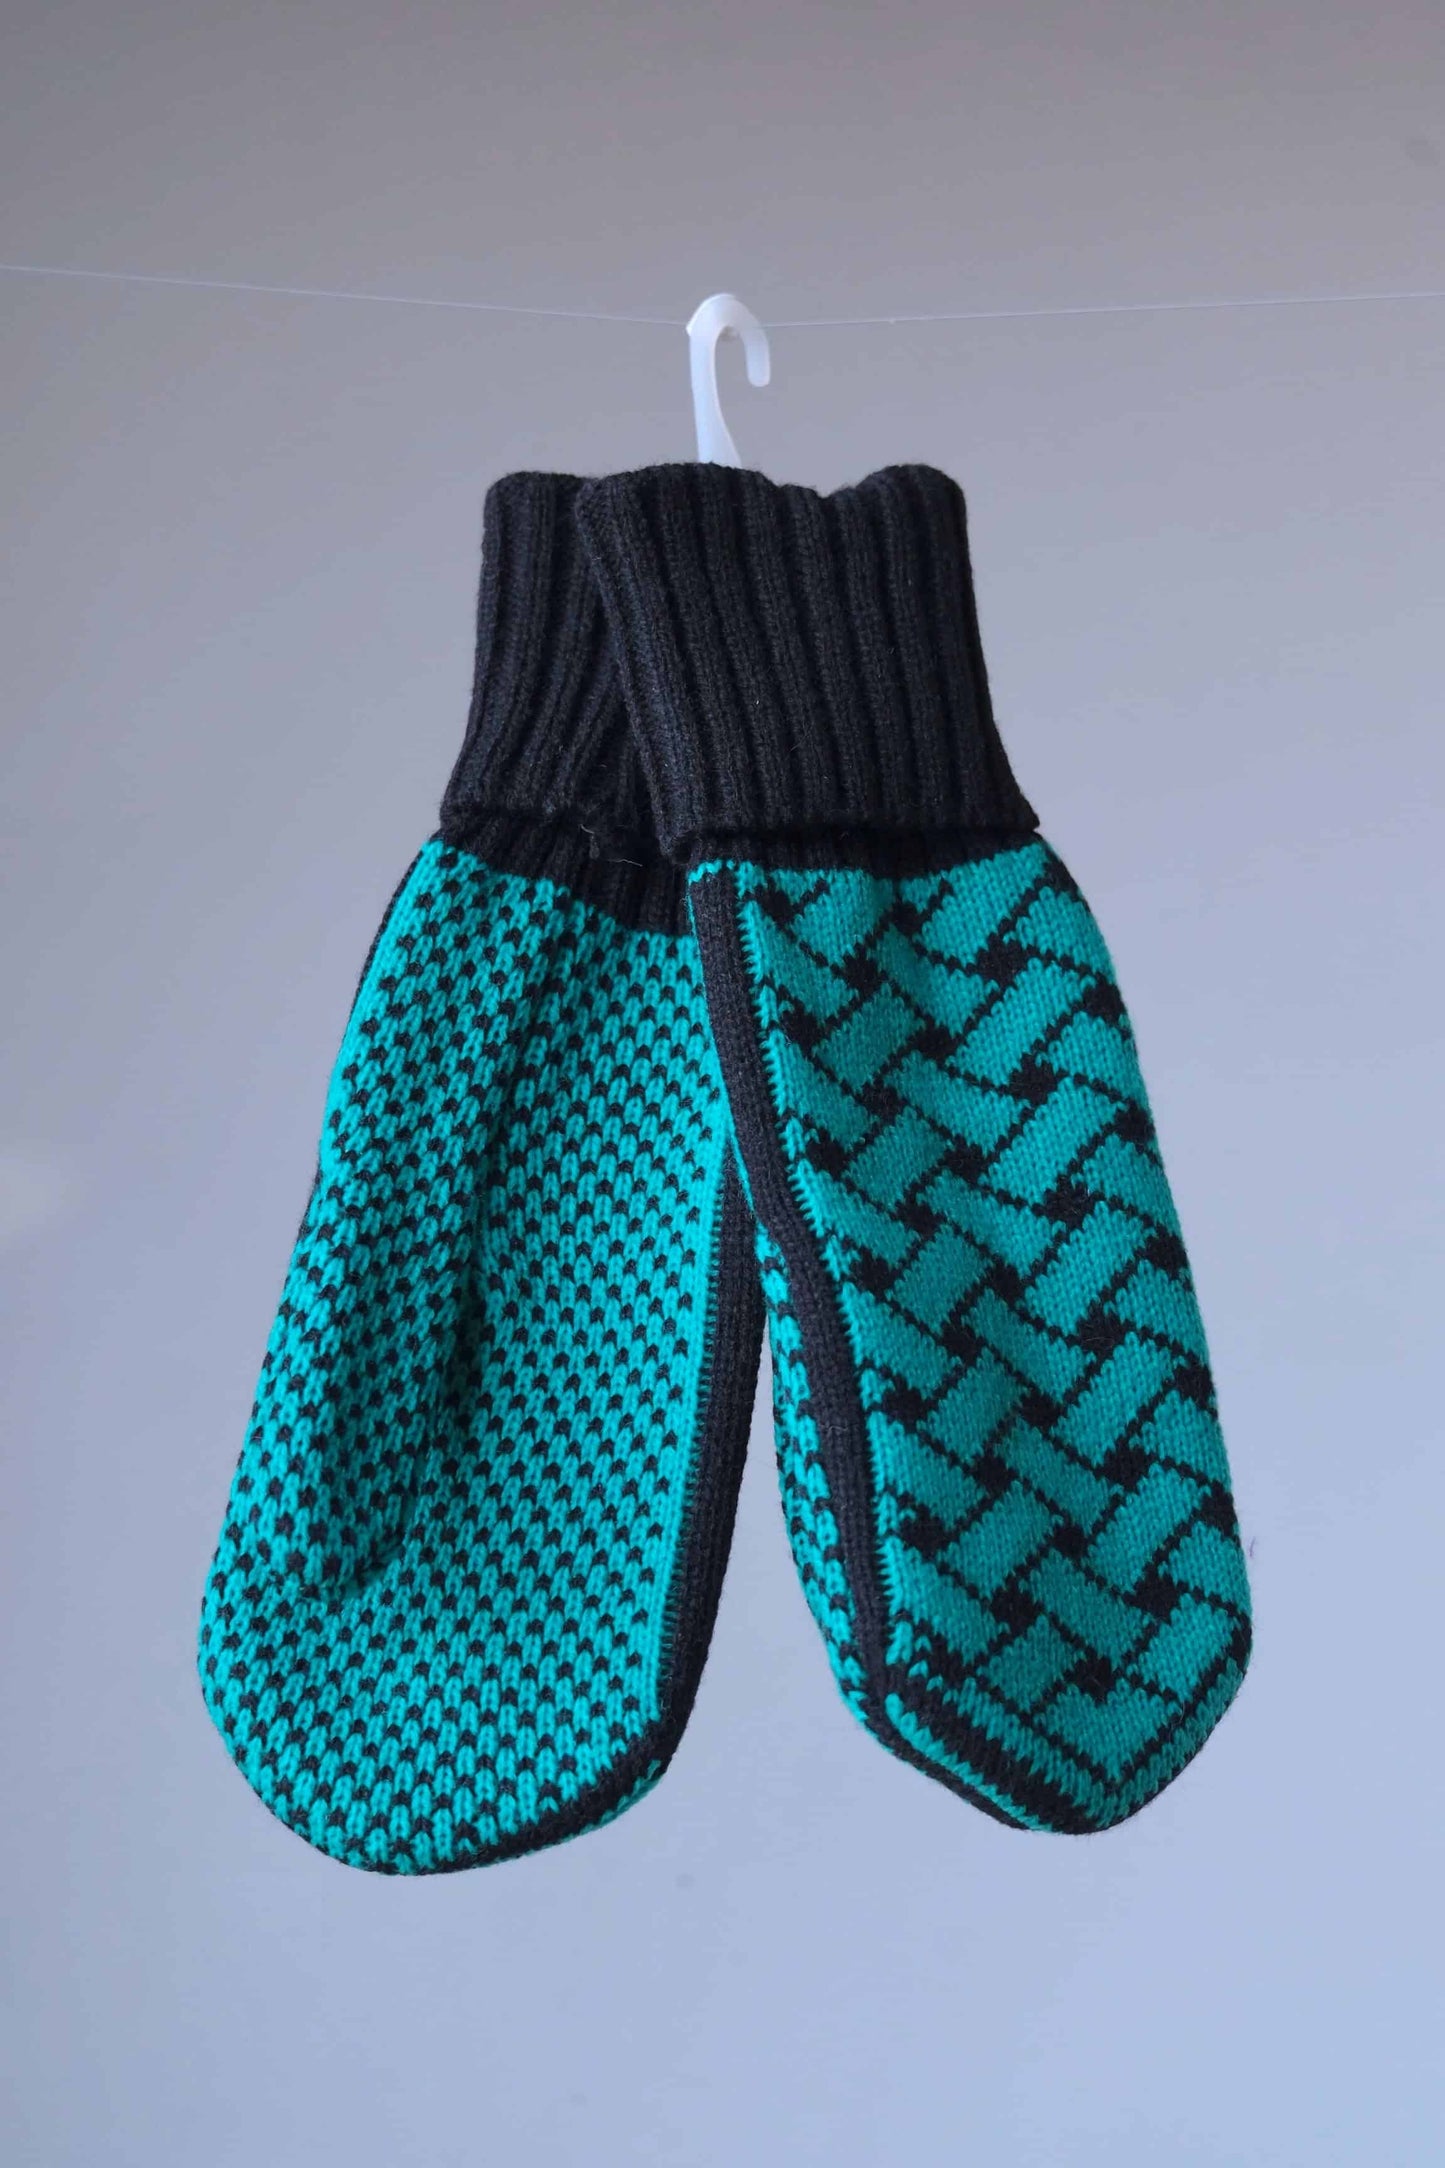 Green and black wool mittens